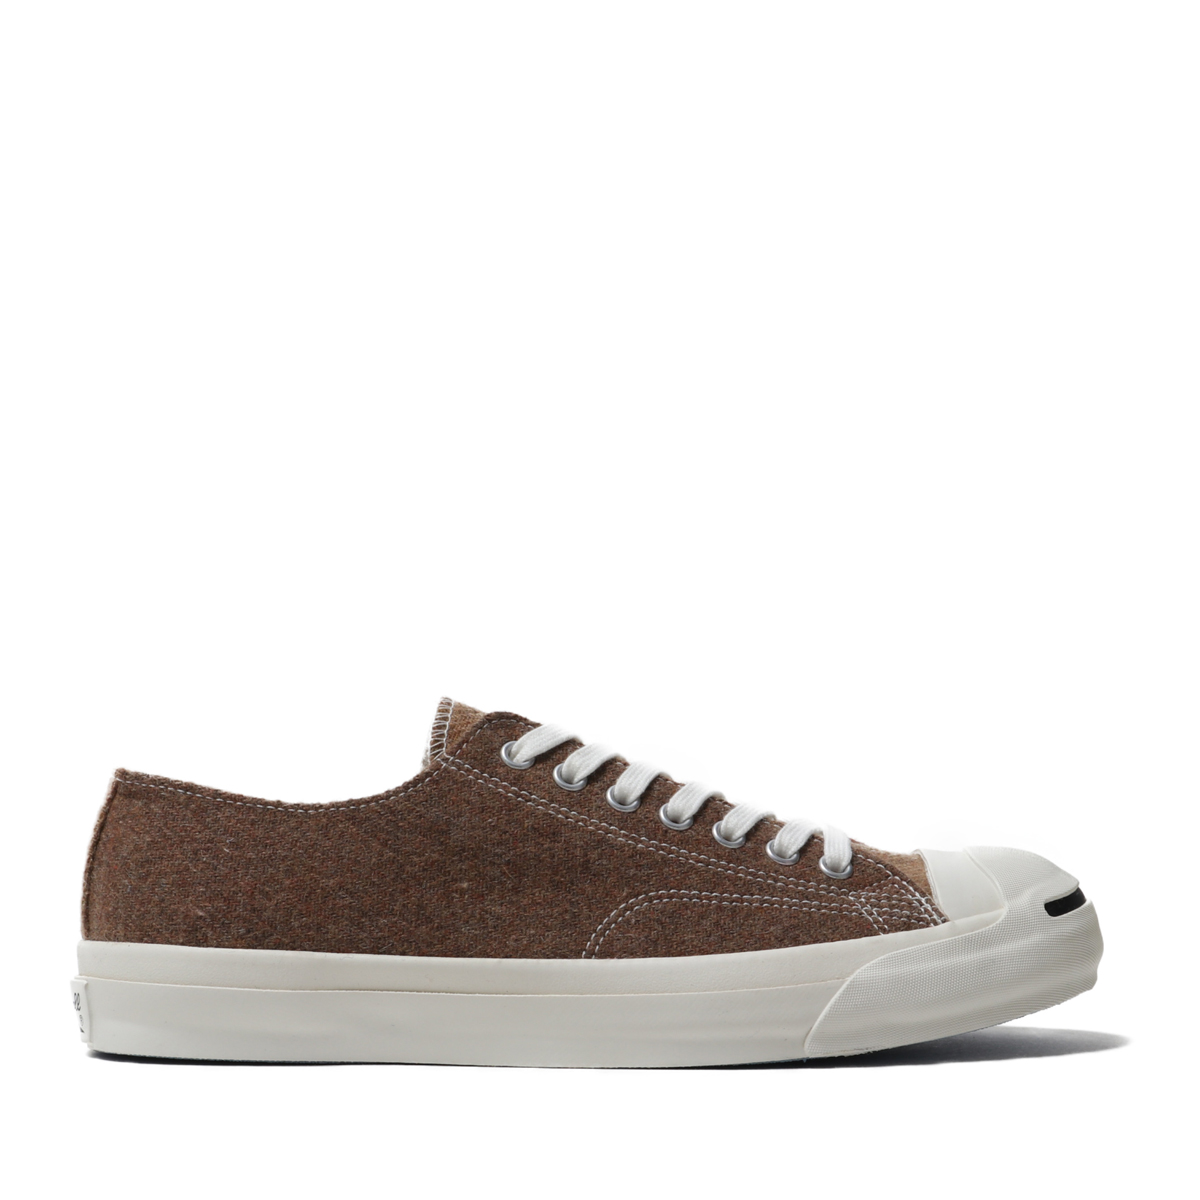 converse jack purcell wool